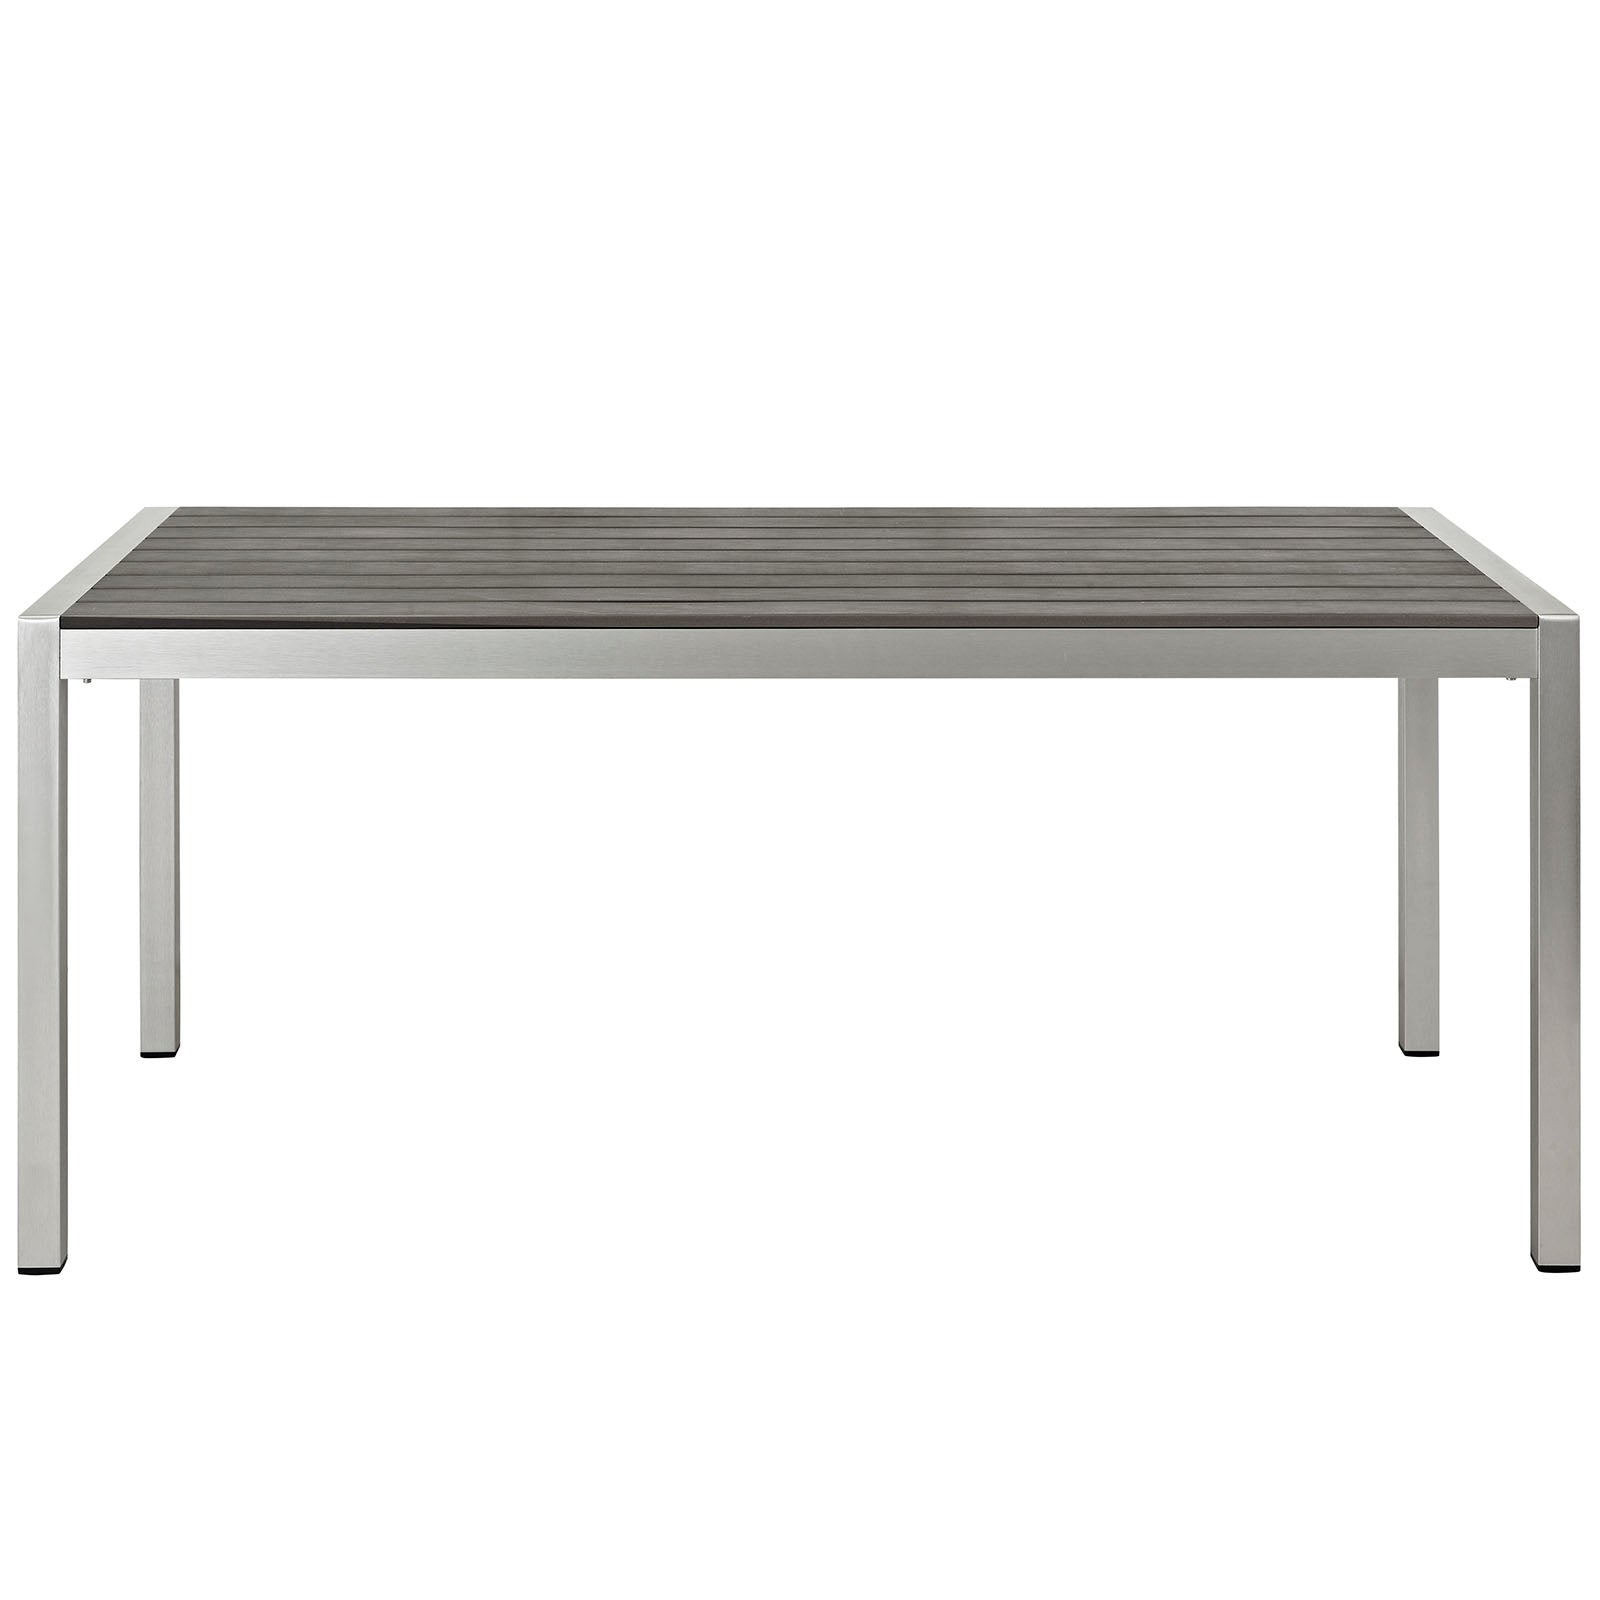 Shore Outdoor Patio Aluminum Dining Table-Outdoor Dining Table-Modway-Wall2Wall Furnishings